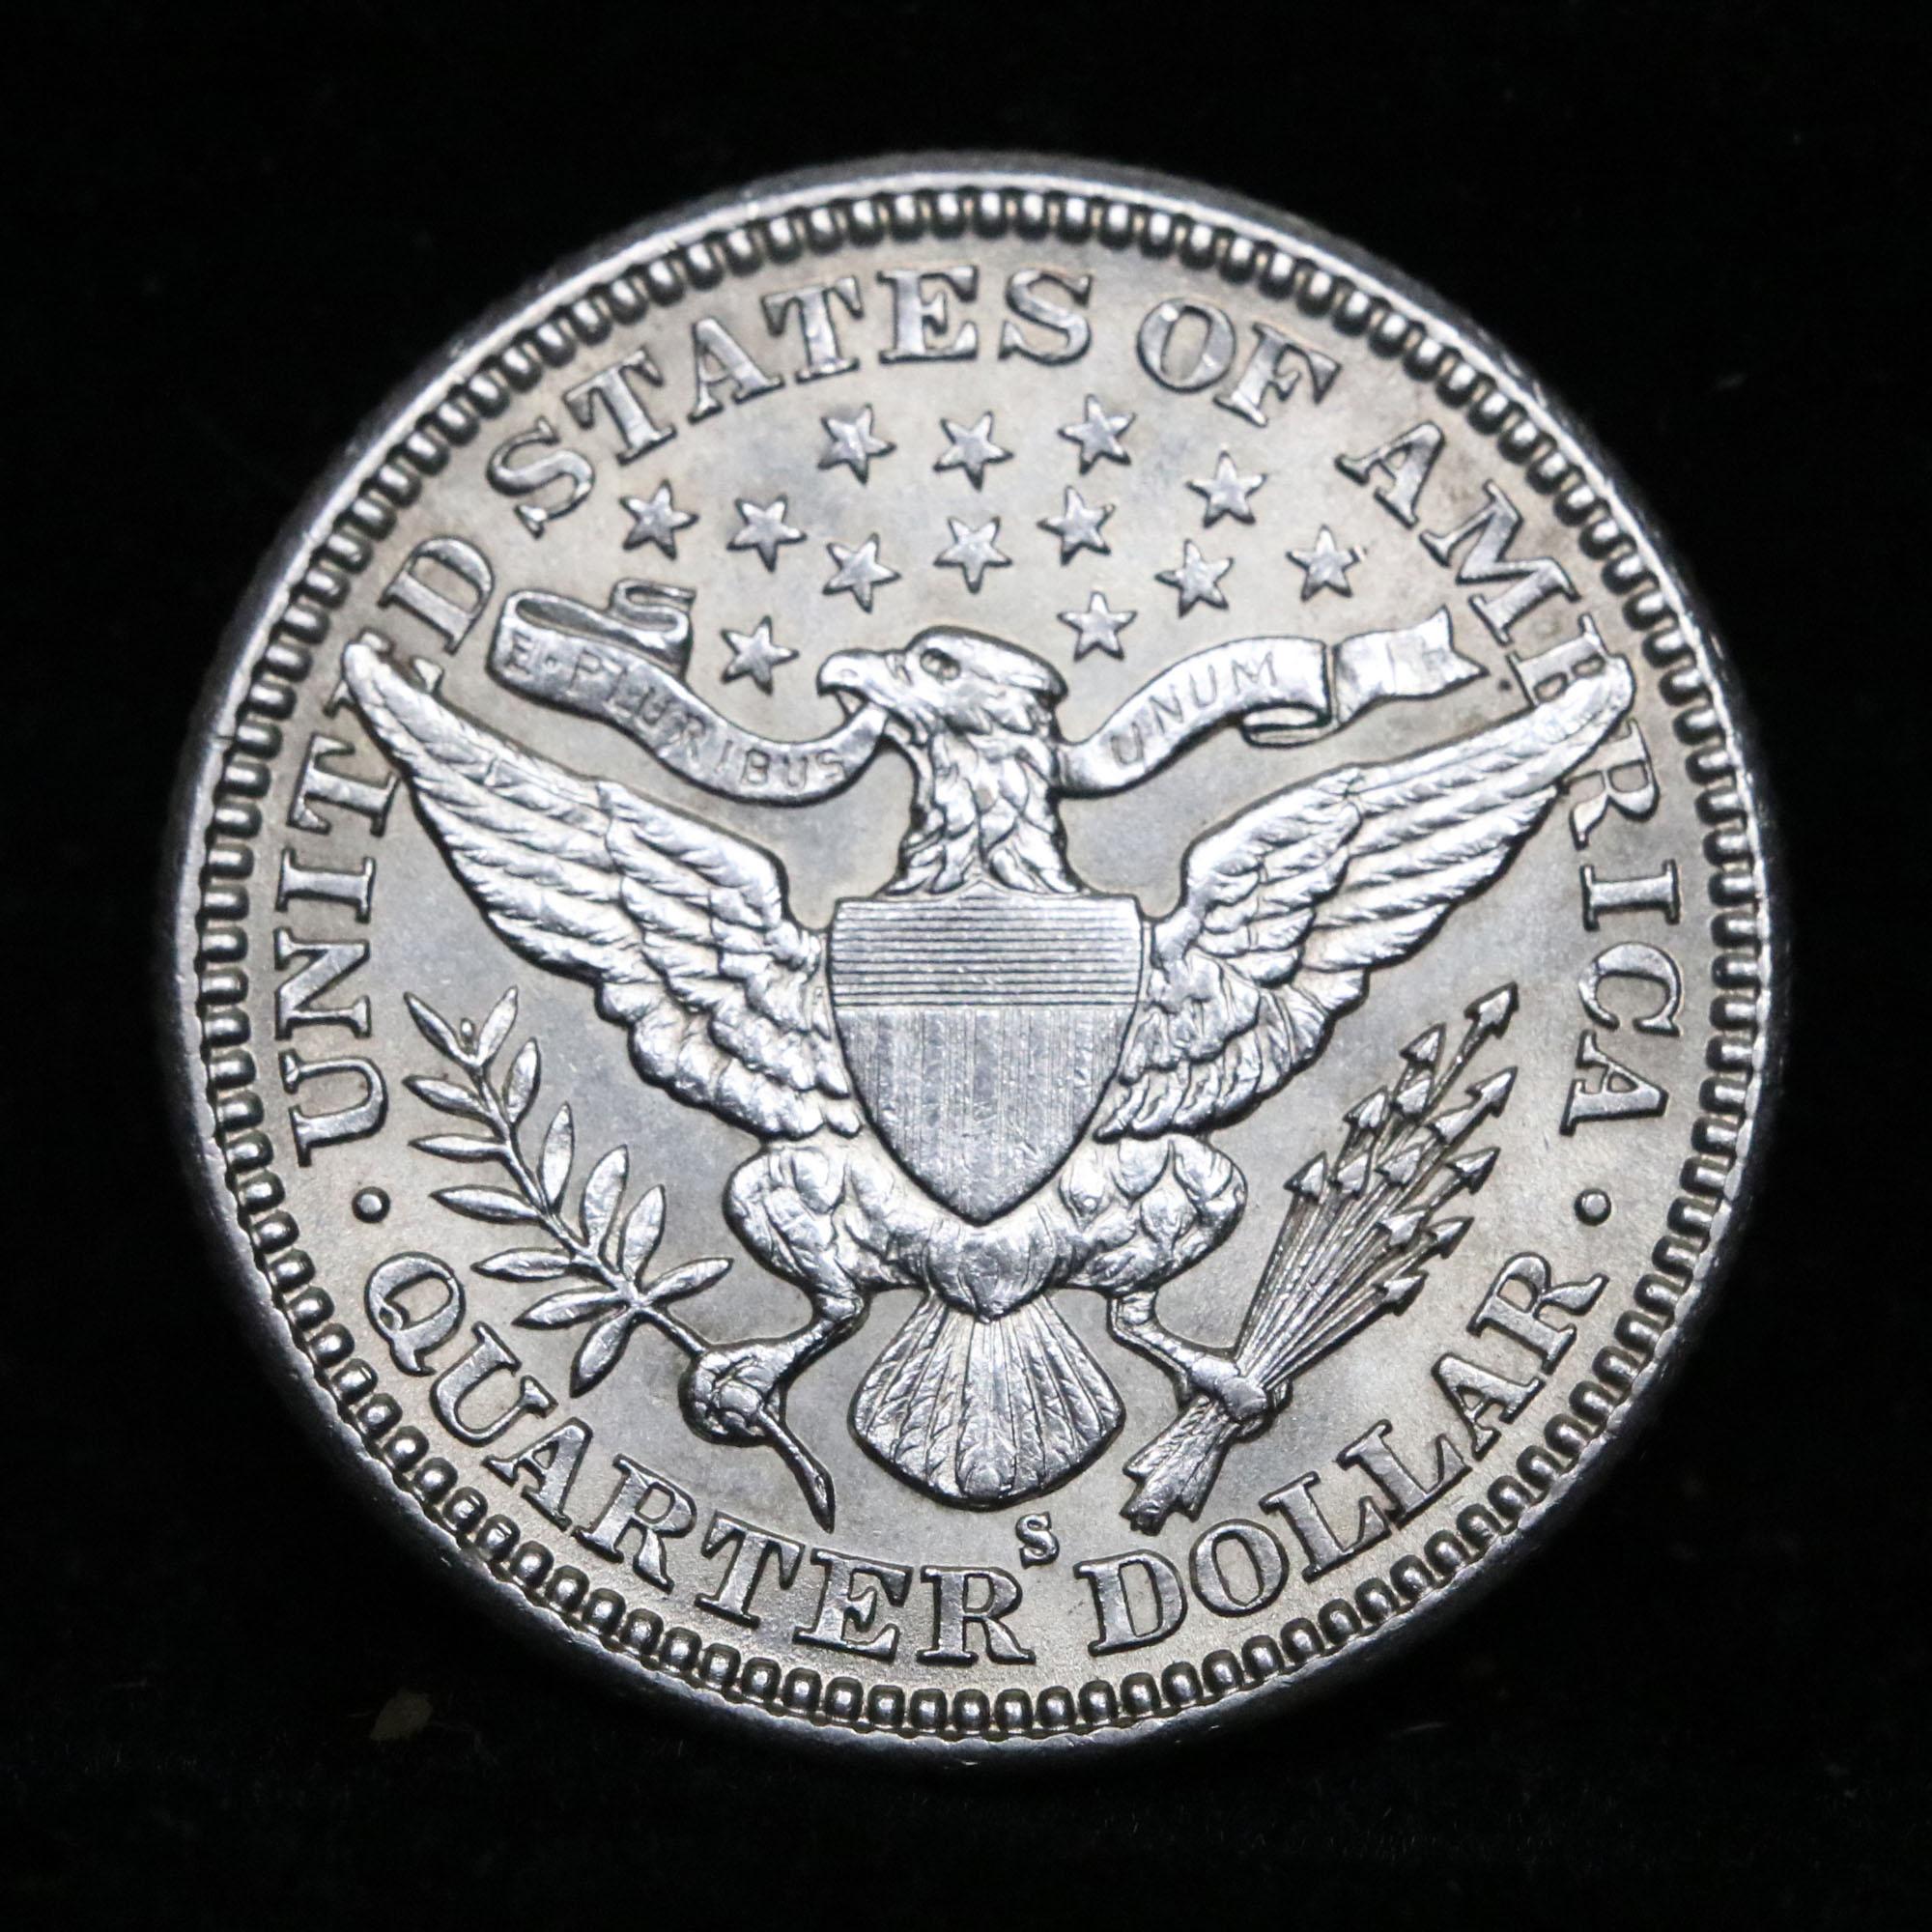 ***Auction Highlight*** 1905-s Barber Quarter 25c Graded Choice Unc by USCG (fc)